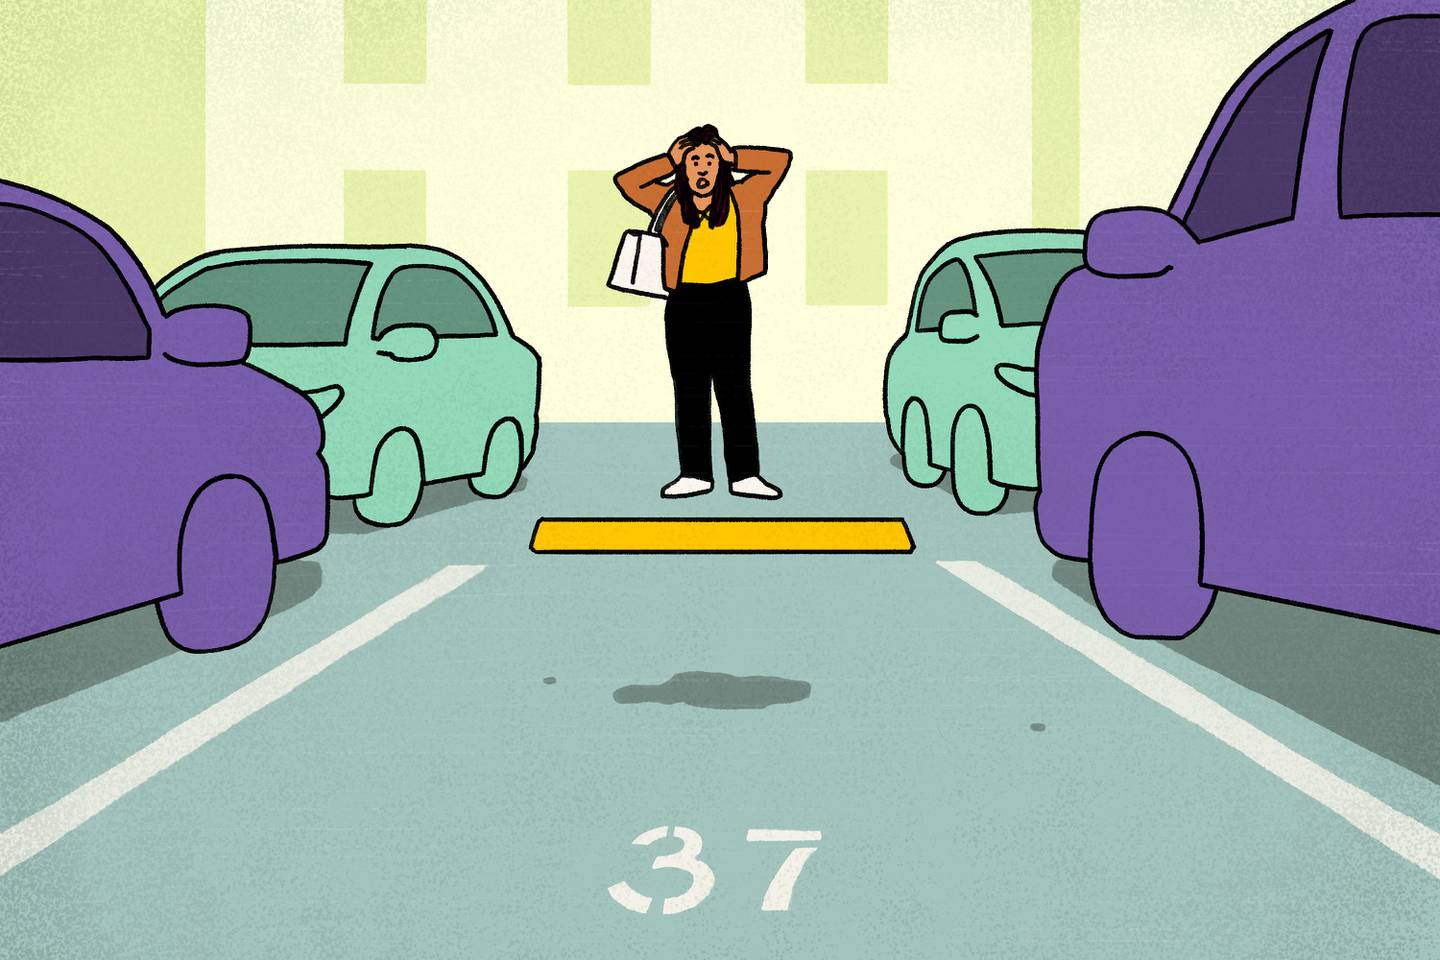 Illustration of woman standing in parking lot in between parked cars, with empty parking space in front of her. She holds her hands on her head and her mouth is wide open in shock.